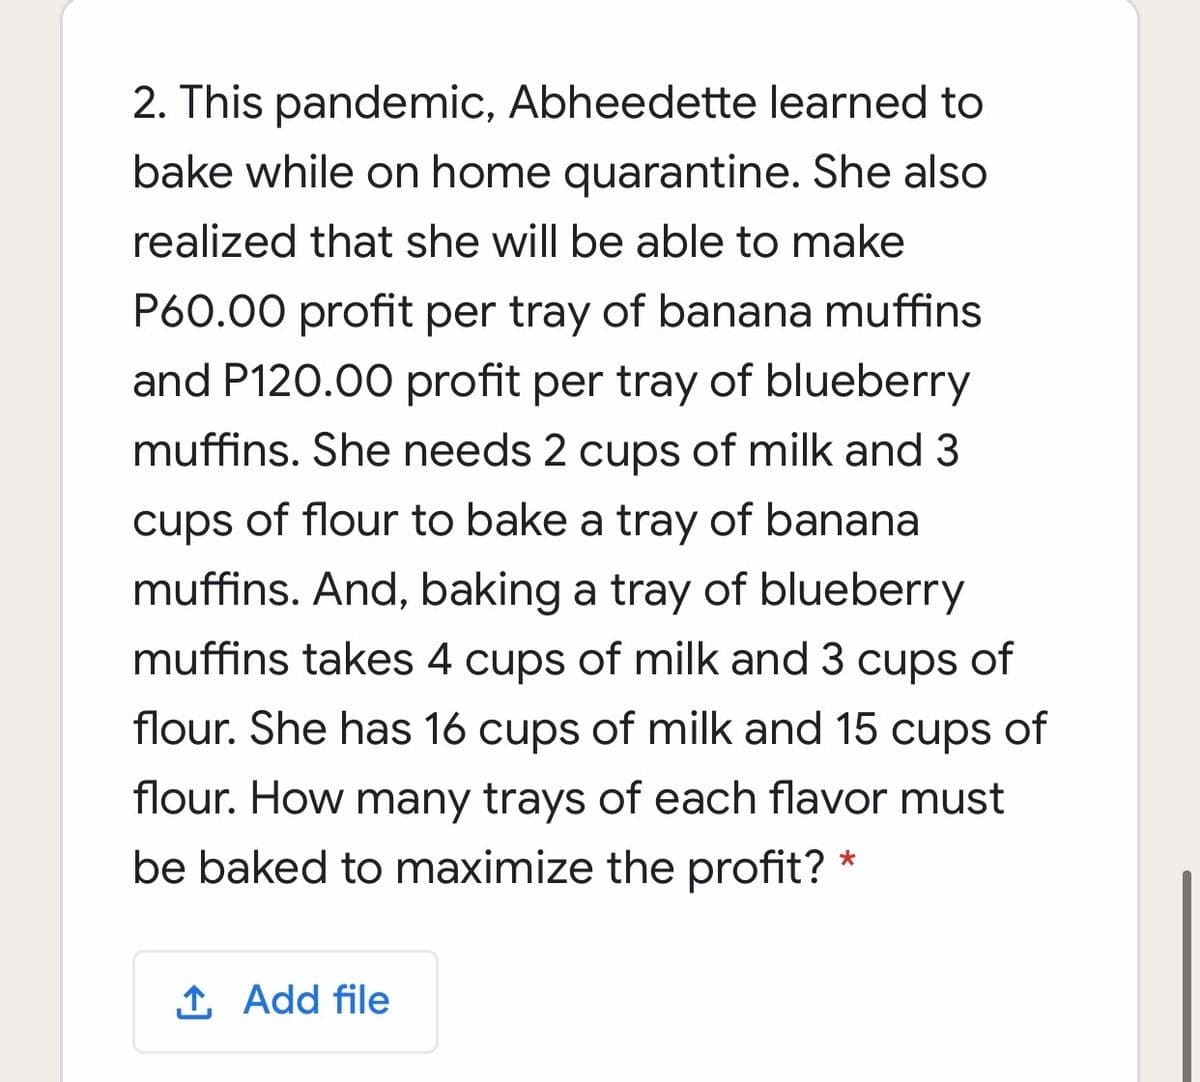 2. This pandemic, Abheedette learned to
bake while on home quarantine. She also
realized that she will be able to make
P60.00 profit per tray of banana muffins
and P120.00 profit per tray of blueberry
muffins. She needs 2 cups of milk and 3
cups of flour to bake a tray of banana
muffins. And, baking a tray of blueberry
muffins takes 4 cups of milk and 3 cups of
flour. She has 16 cups of milk and 15 cups of
flour. How many trays of each flavor must
be baked to maximize the profit? *
1 Add file
